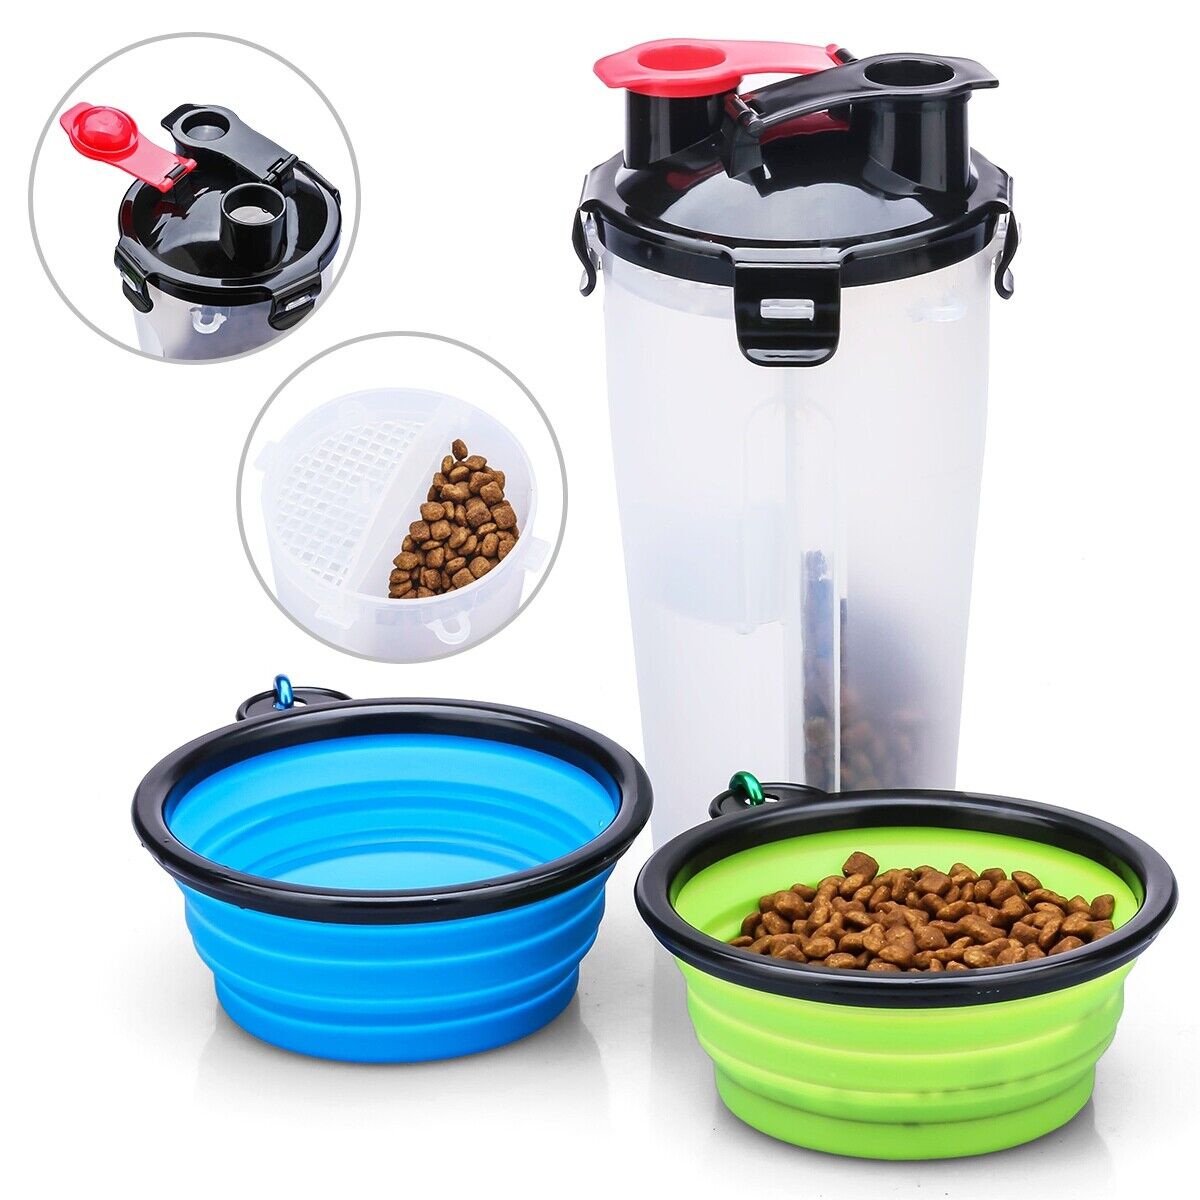 Food and Water Dispenser by dktravedogs.com